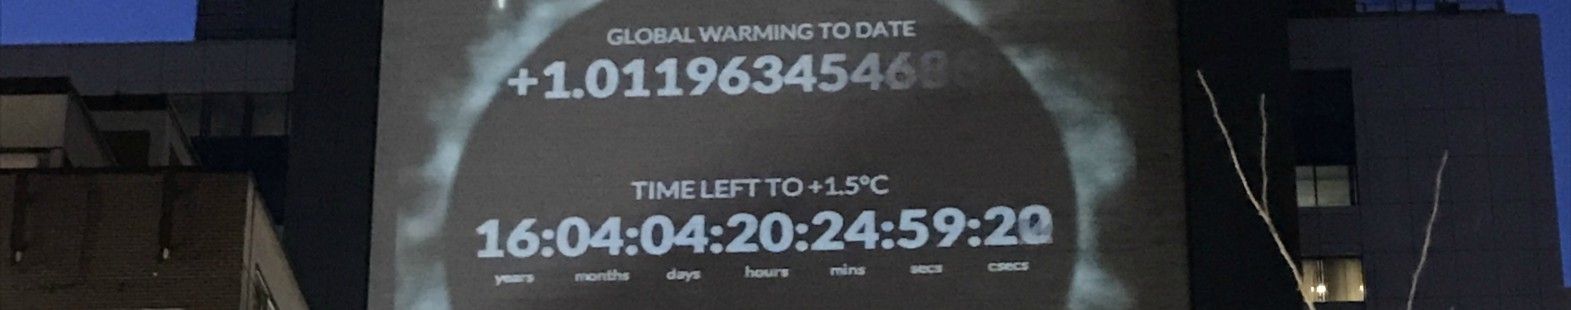 Photo shows a projection of the climate clock on the side of a building for the article by Samantha Mailhot for the CMOS Bulletin.